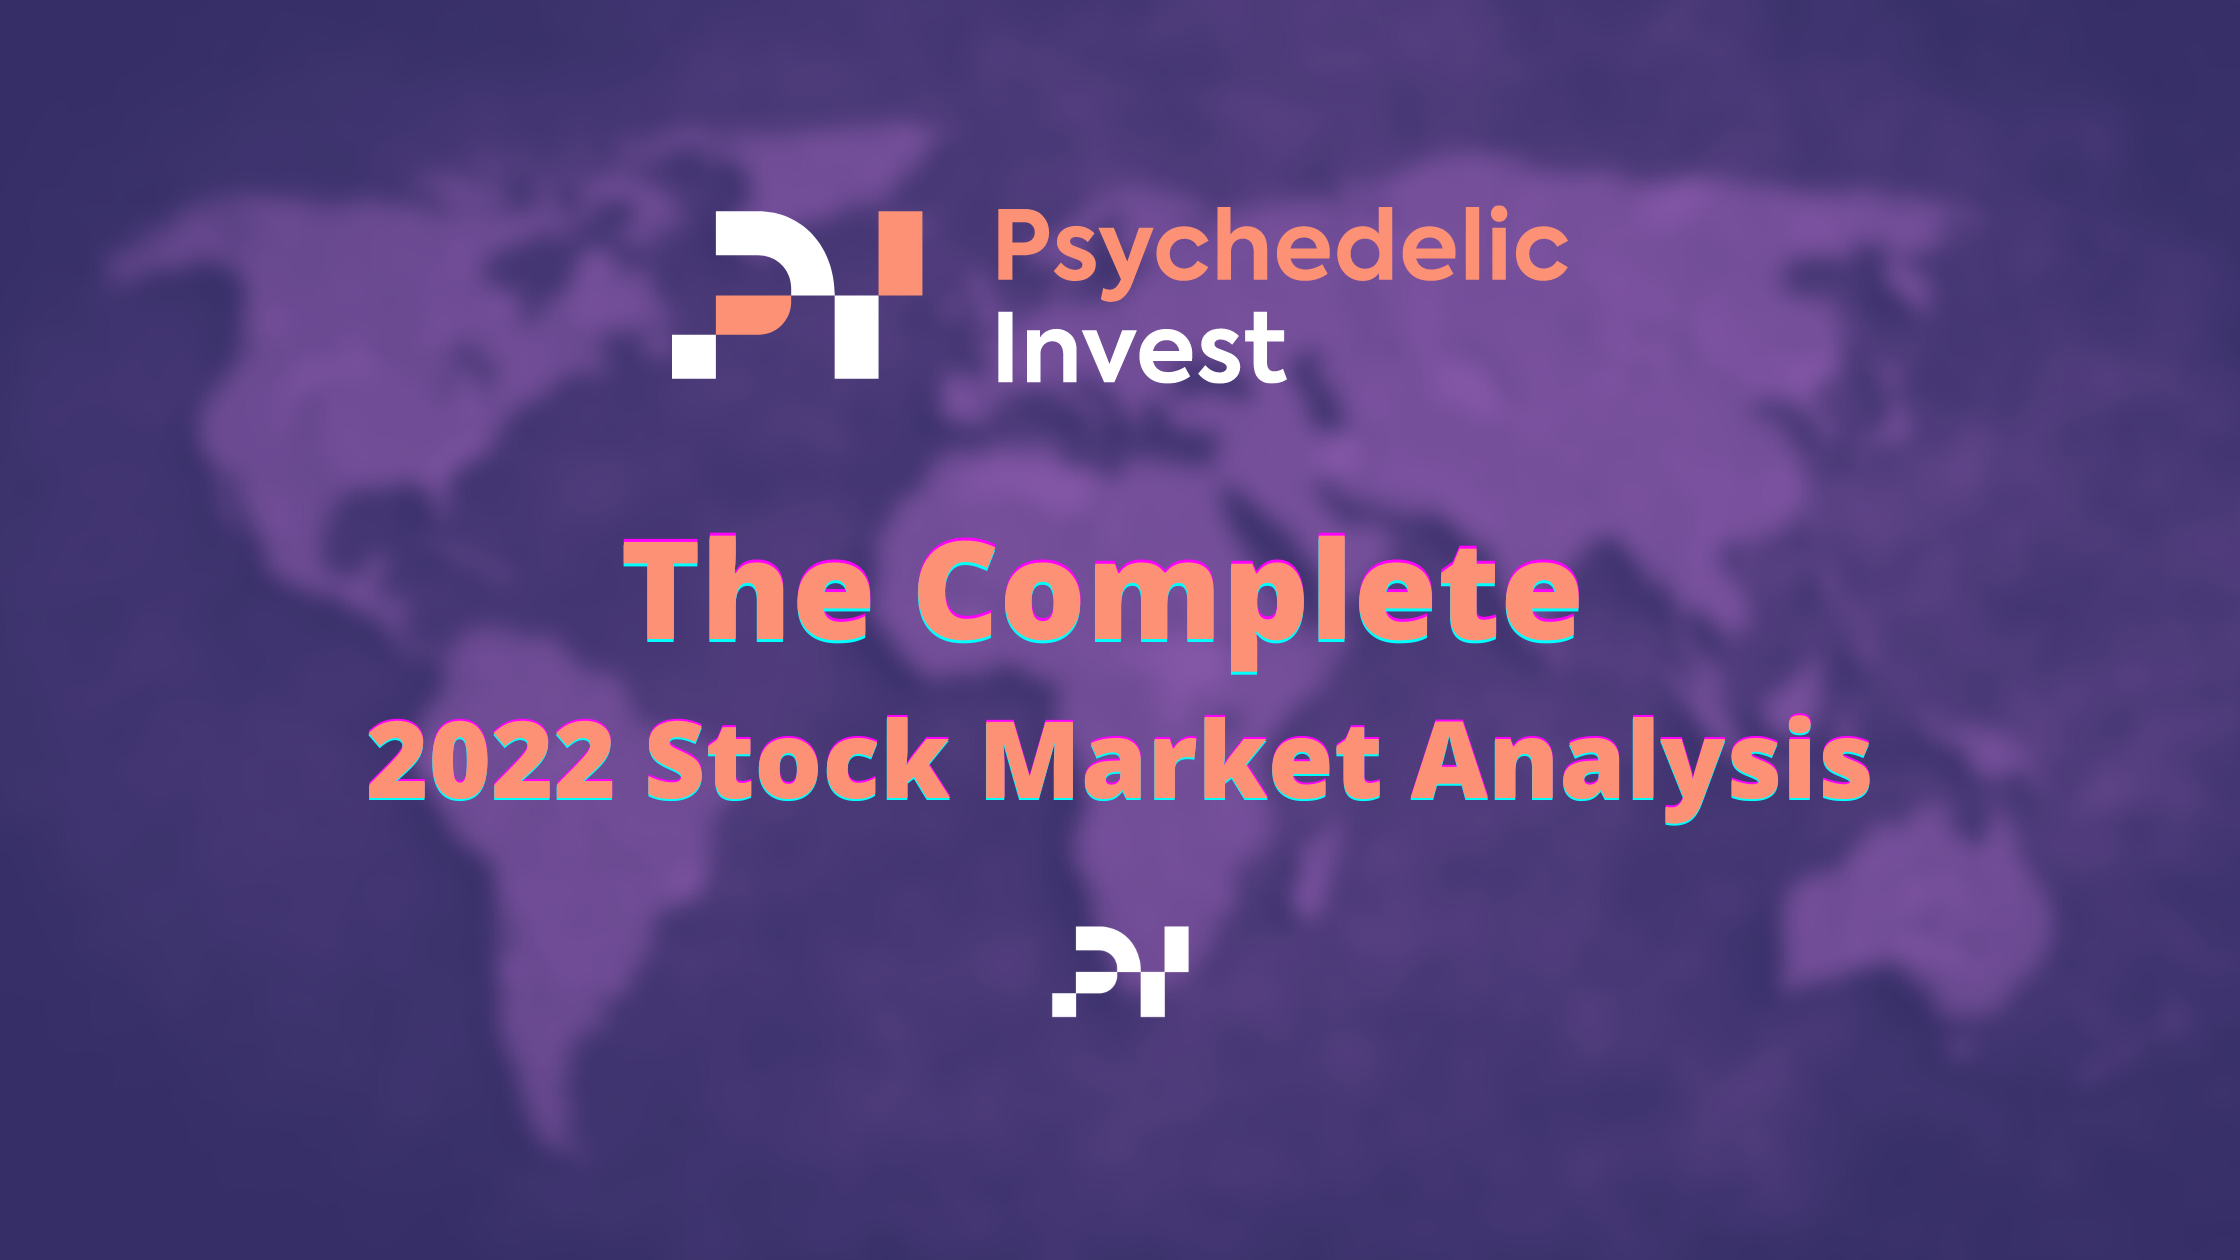 The Complete 2022 Stock Market Analysis